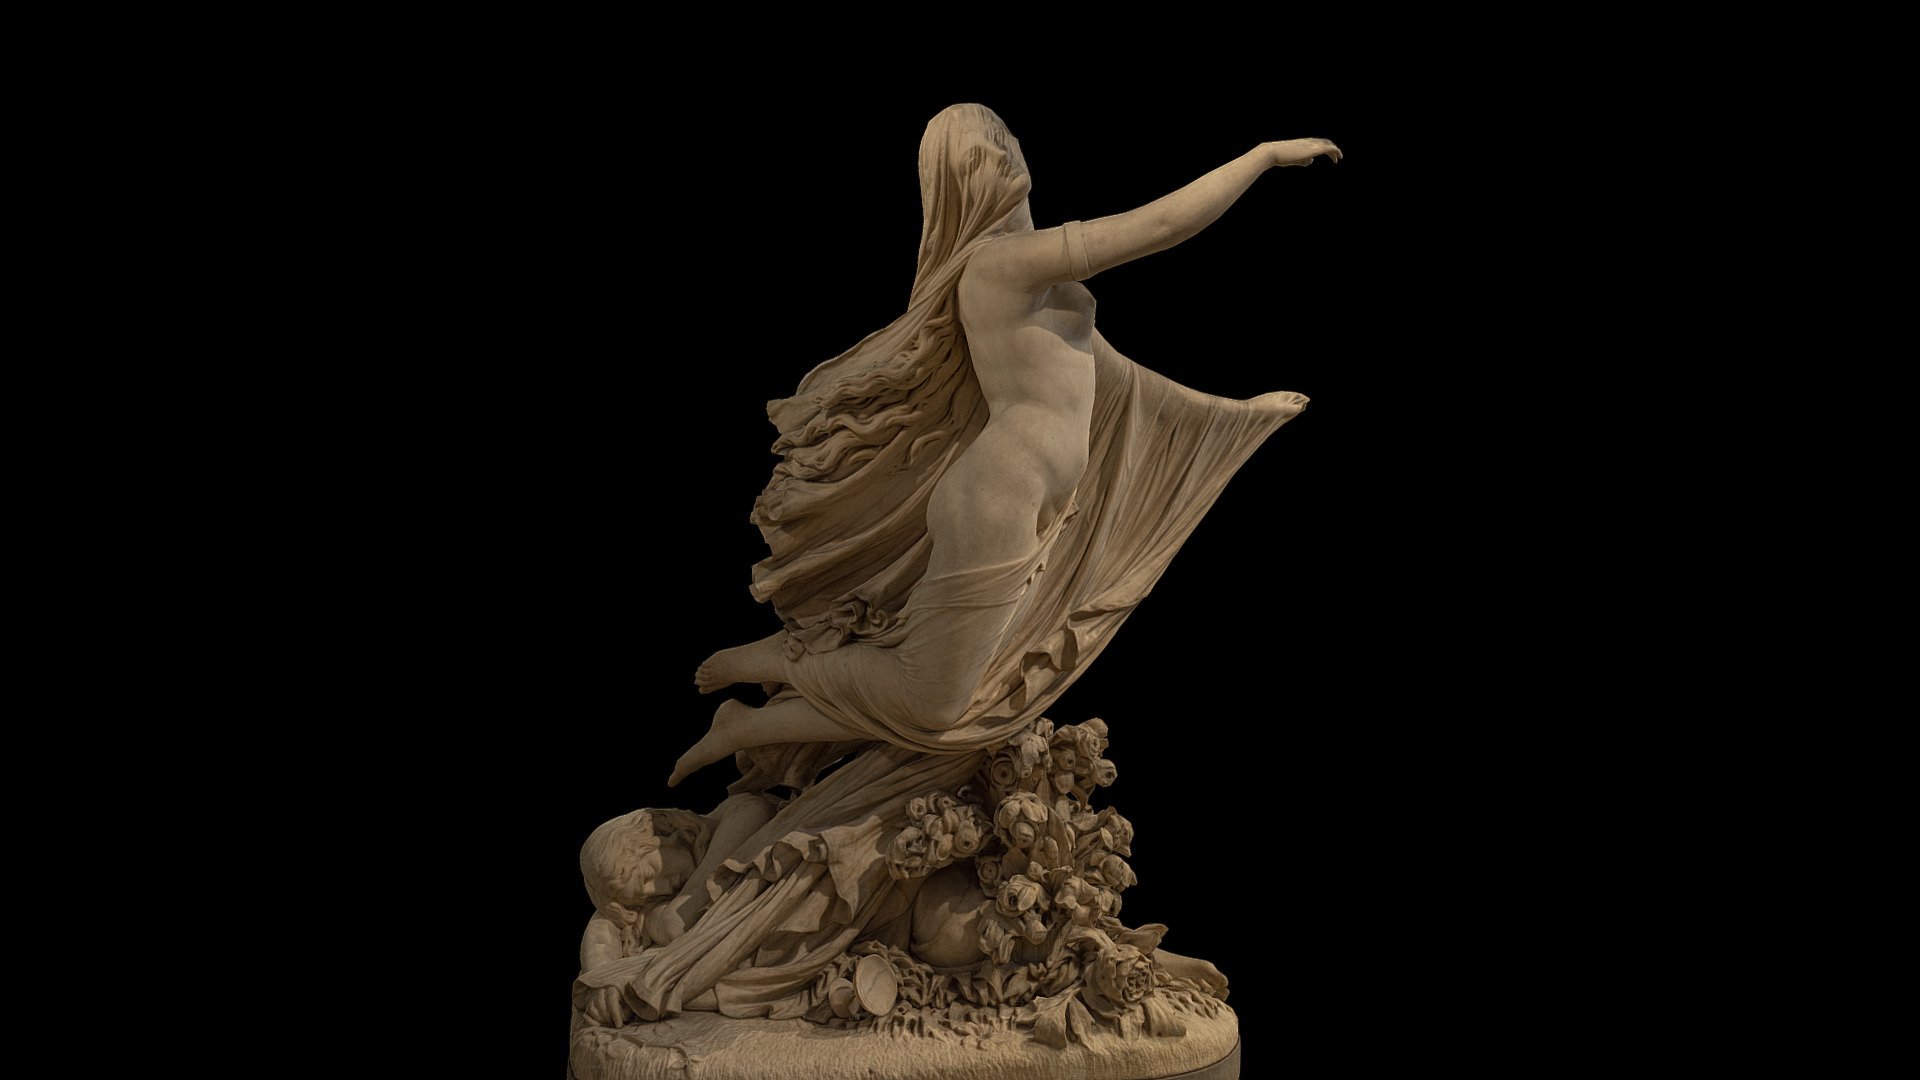 The Sleep of Sorrow and the Dream of Joy (1861)

Photogrammetry + reality capture processing. V&amp;A museum.
It is always surprising to see works in which the fall of the fabrics on the bodies is represented with mastery. This is one of them, the work of the well-known Raffaelle Monti. 

It was created as an allegory of the political and artistic reunification of the Italian kingdom, a resurgence that Monti tries to capture and announce through a beautiful piece. It was one of the 3 most seen works at the London International Exhibition of 1862, which brought together various technological advances and art exhibitions from 36 different during several months.
I could not insist more that you go to the V&amp;A museum  in London to see such a delicate and precious sculpture 3d model